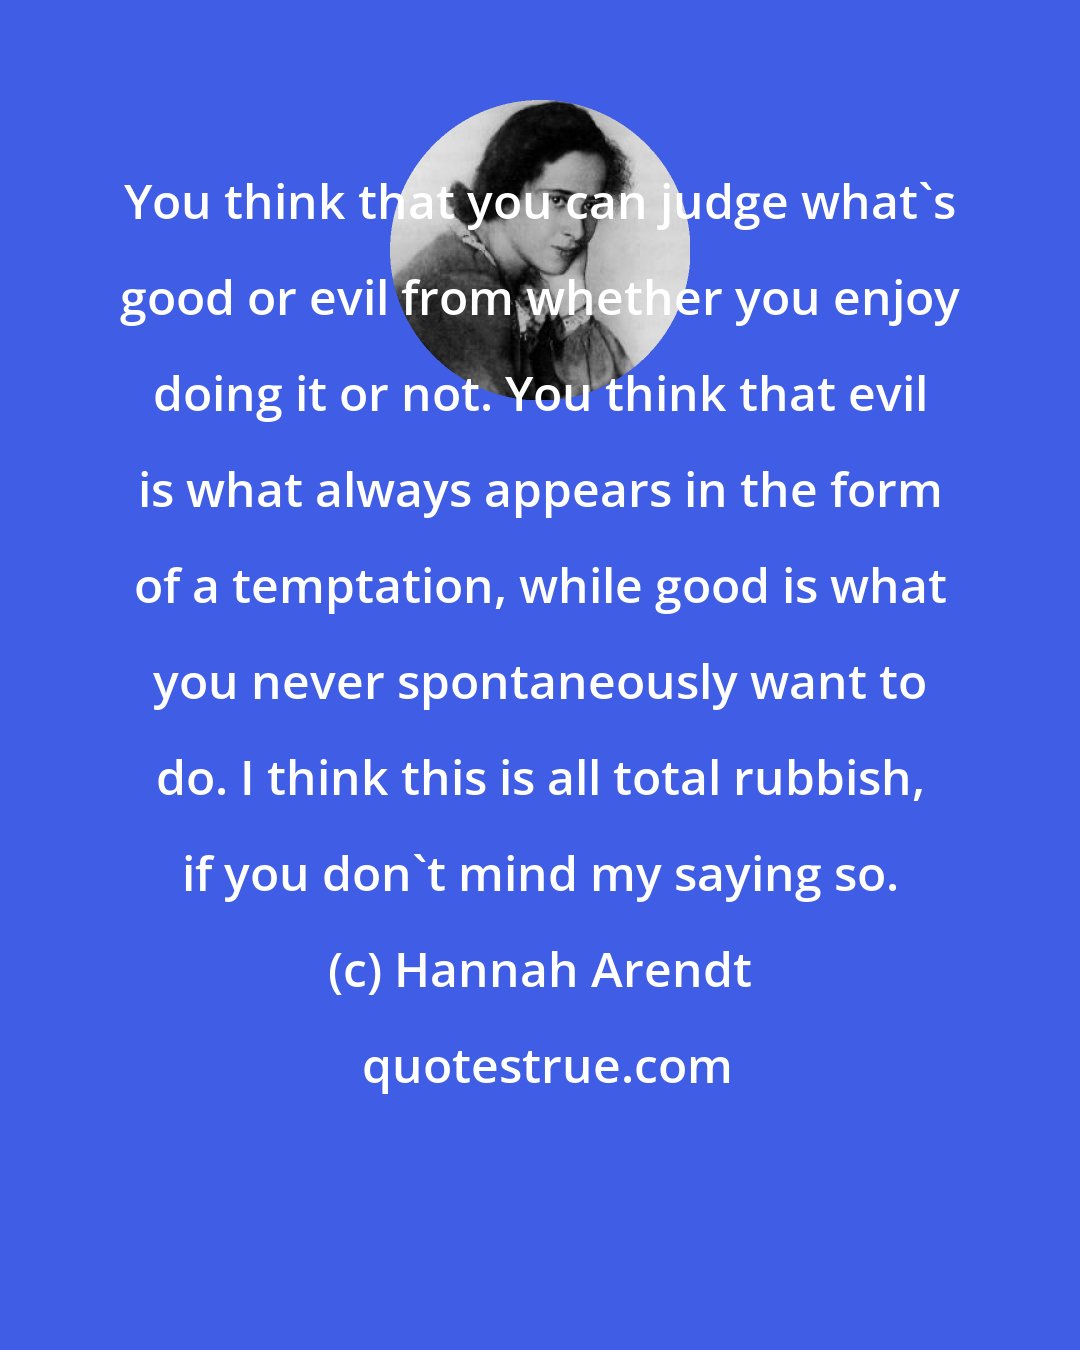 Hannah Arendt: You think that you can judge what's good or evil from whether you enjoy doing it or not. You think that evil is what always appears in the form of a temptation, while good is what you never spontaneously want to do. I think this is all total rubbish, if you don't mind my saying so.